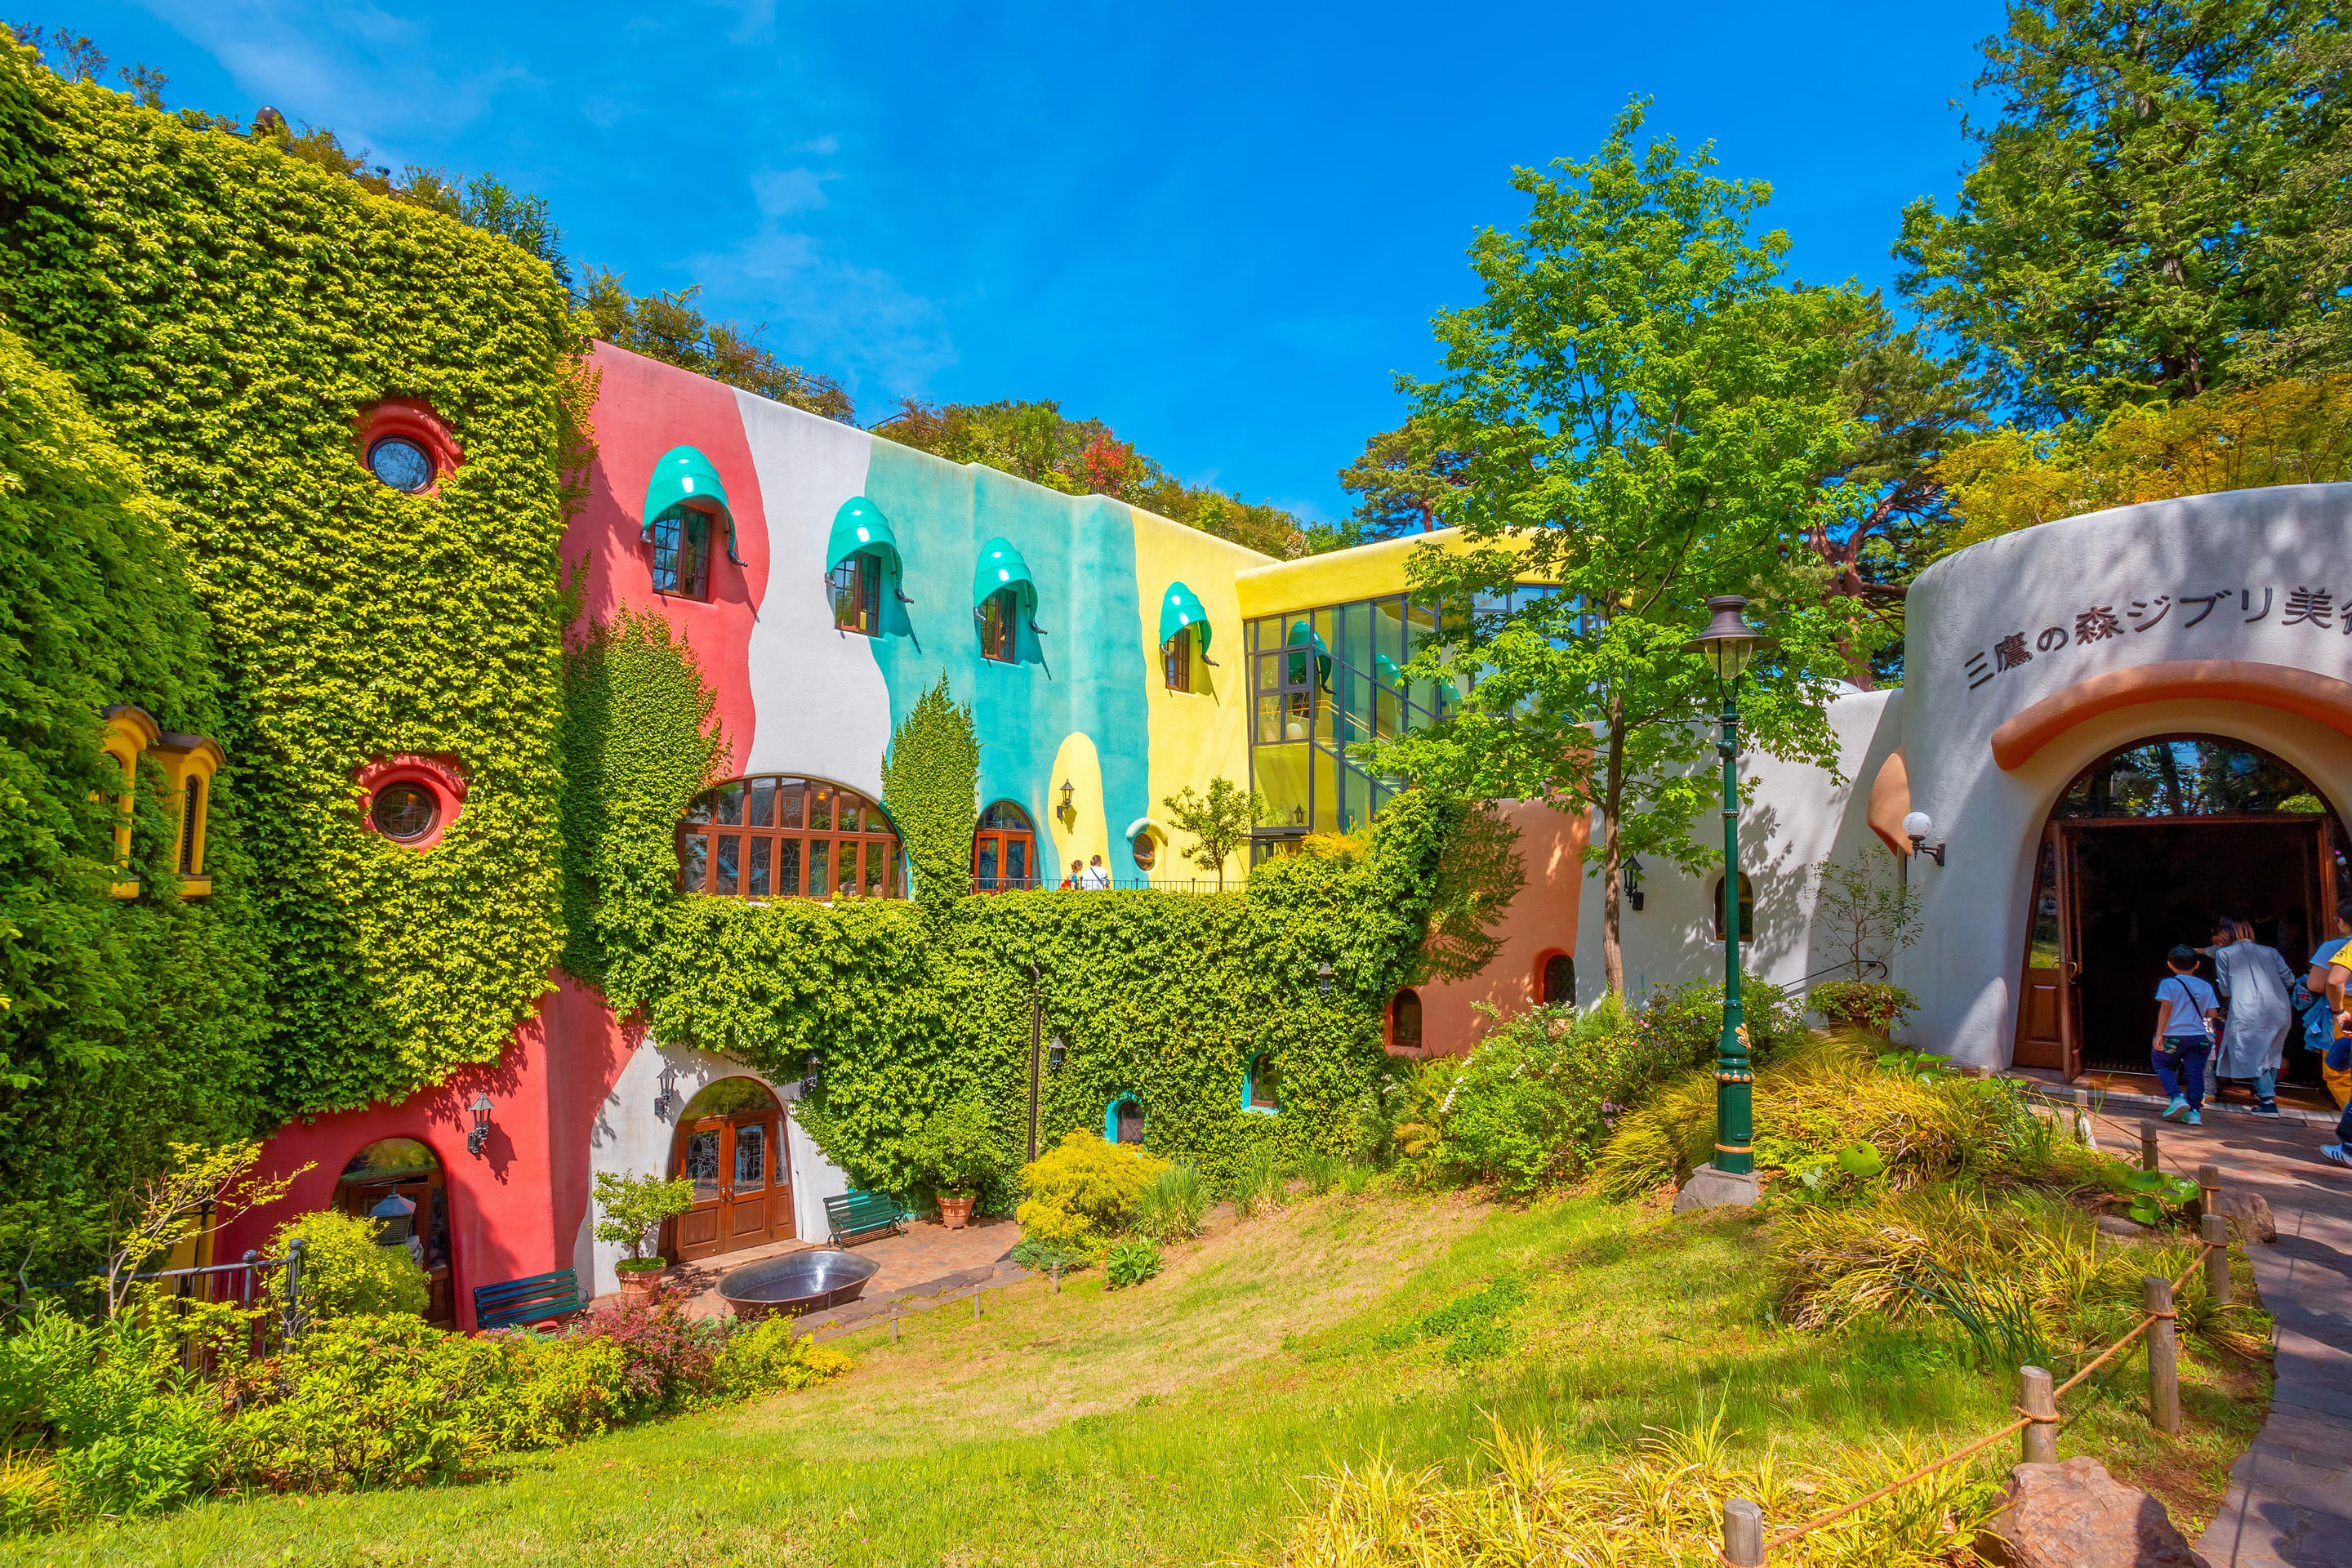 Ghibli Museum Overview